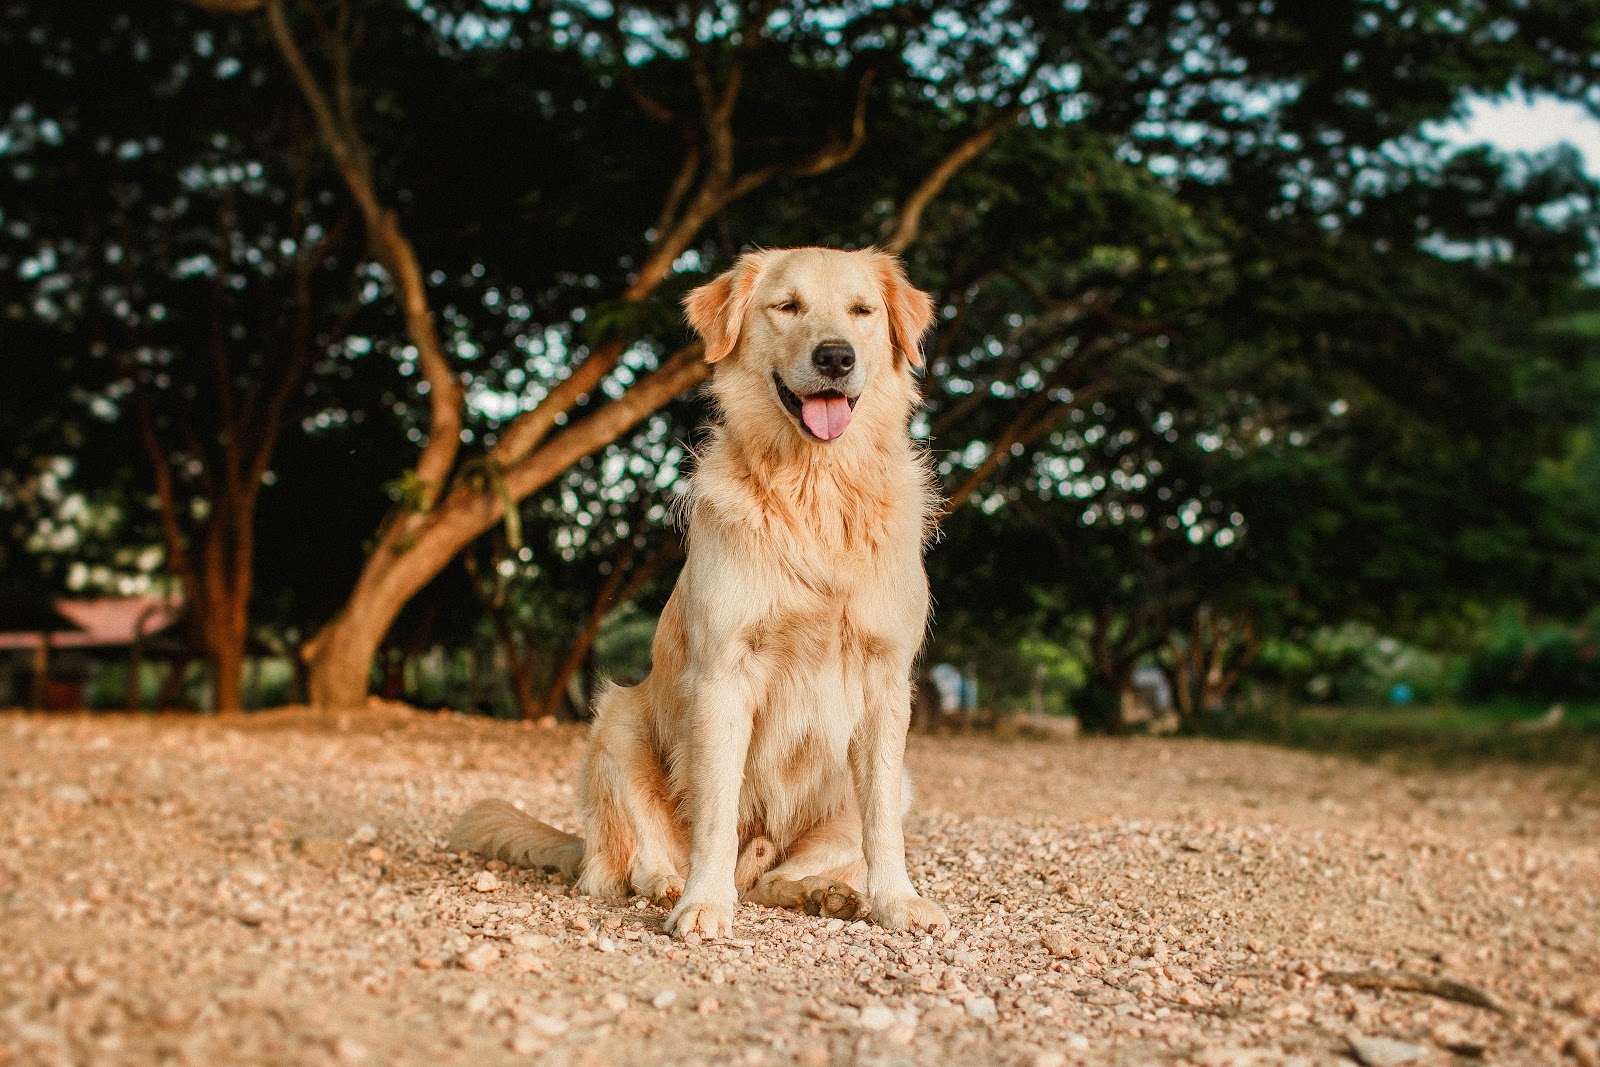 Golden Retrievers are active dogs that are also known for showing their affection towards their owners.